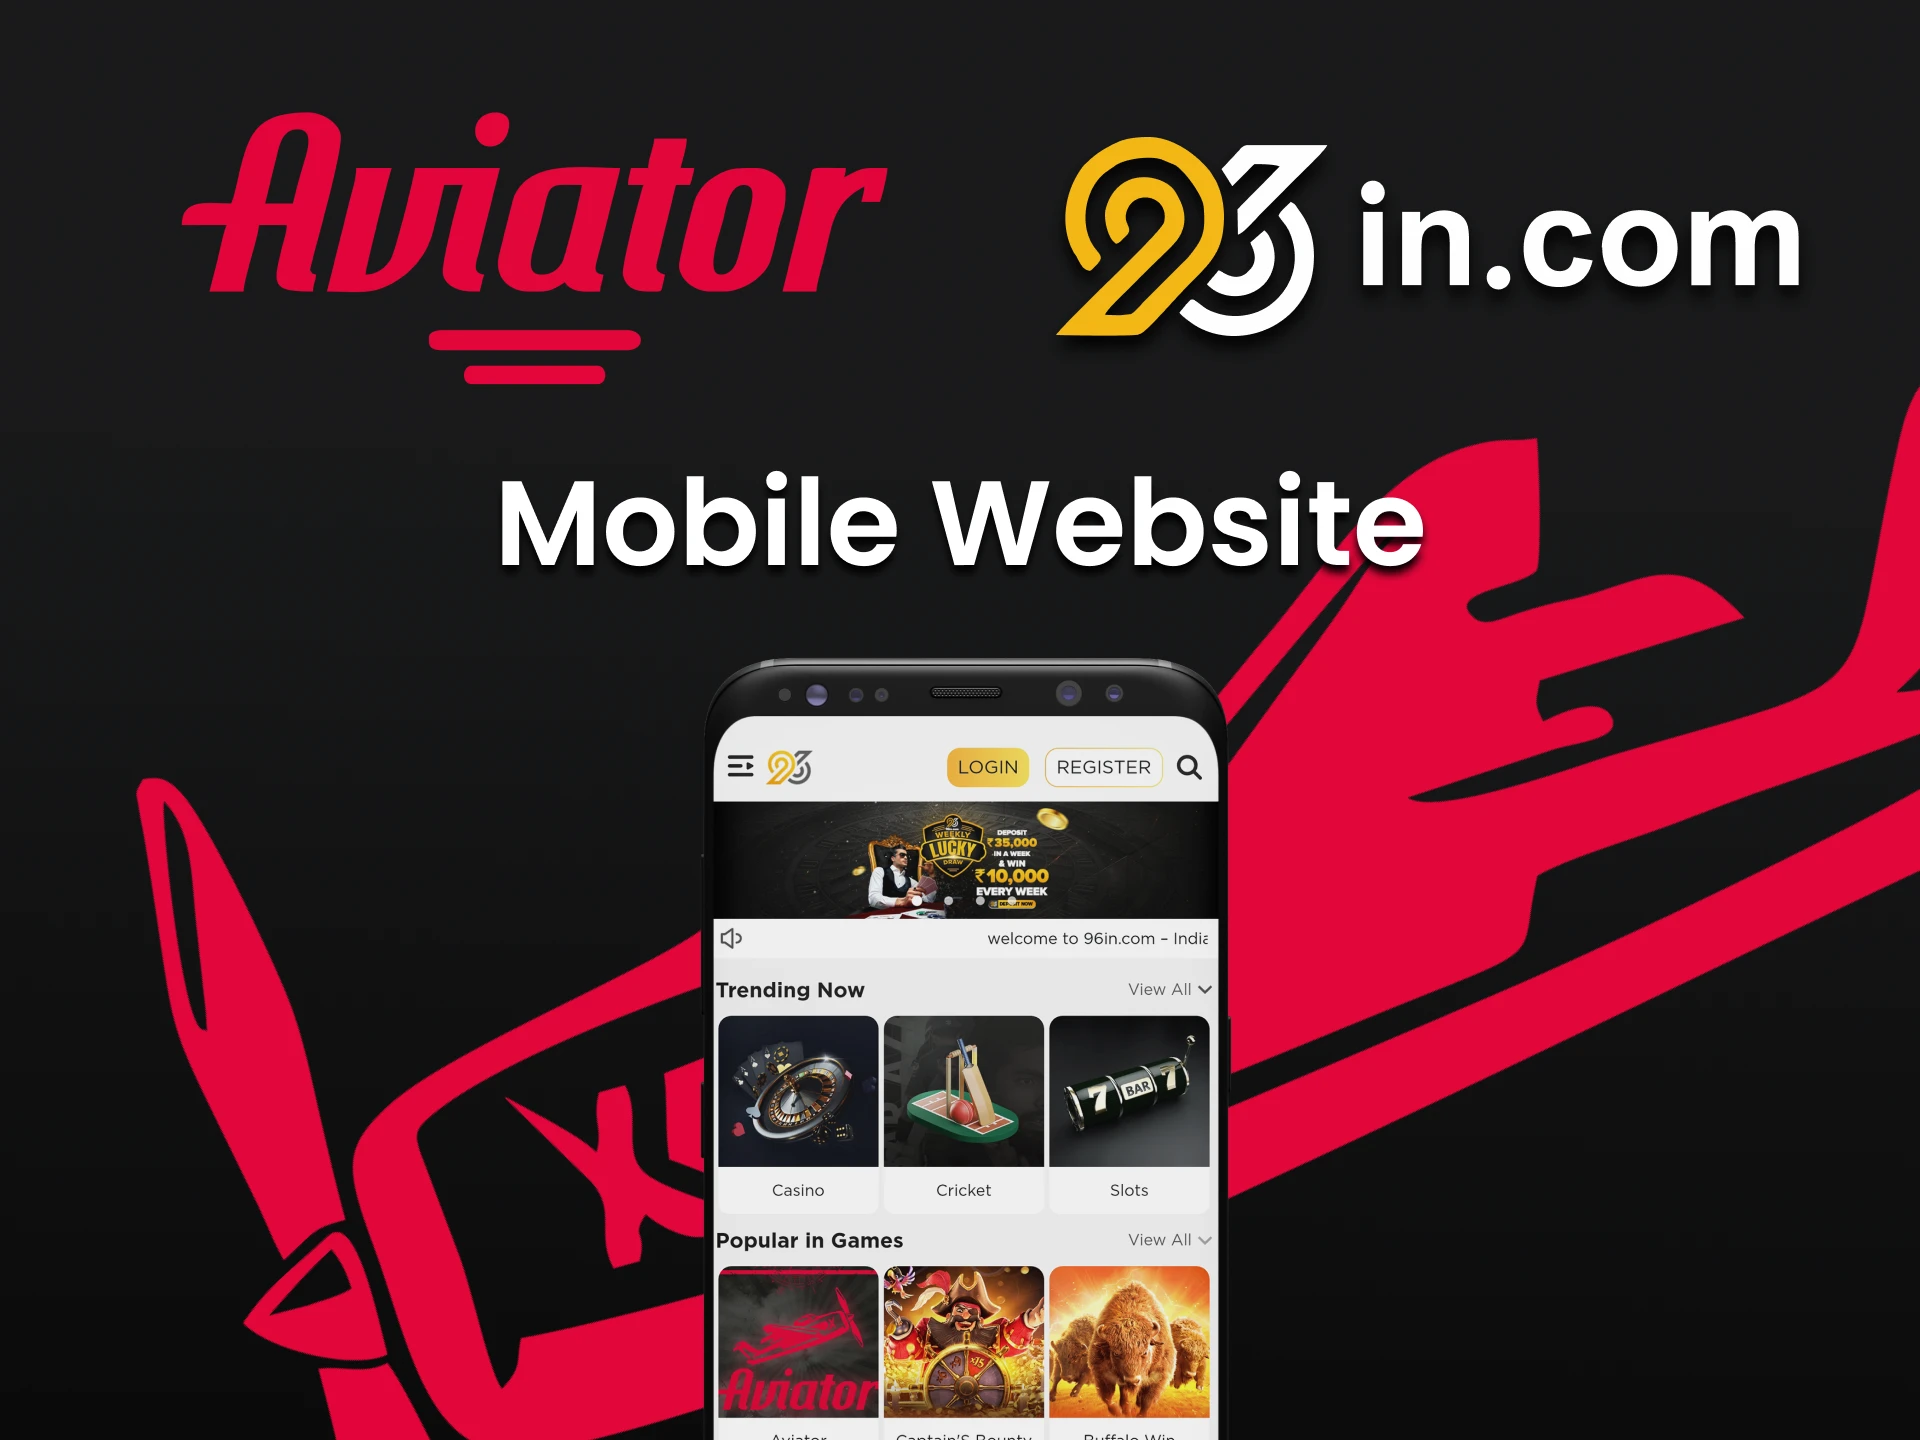 Visit the mobile version of the 96in site to play Aviator.